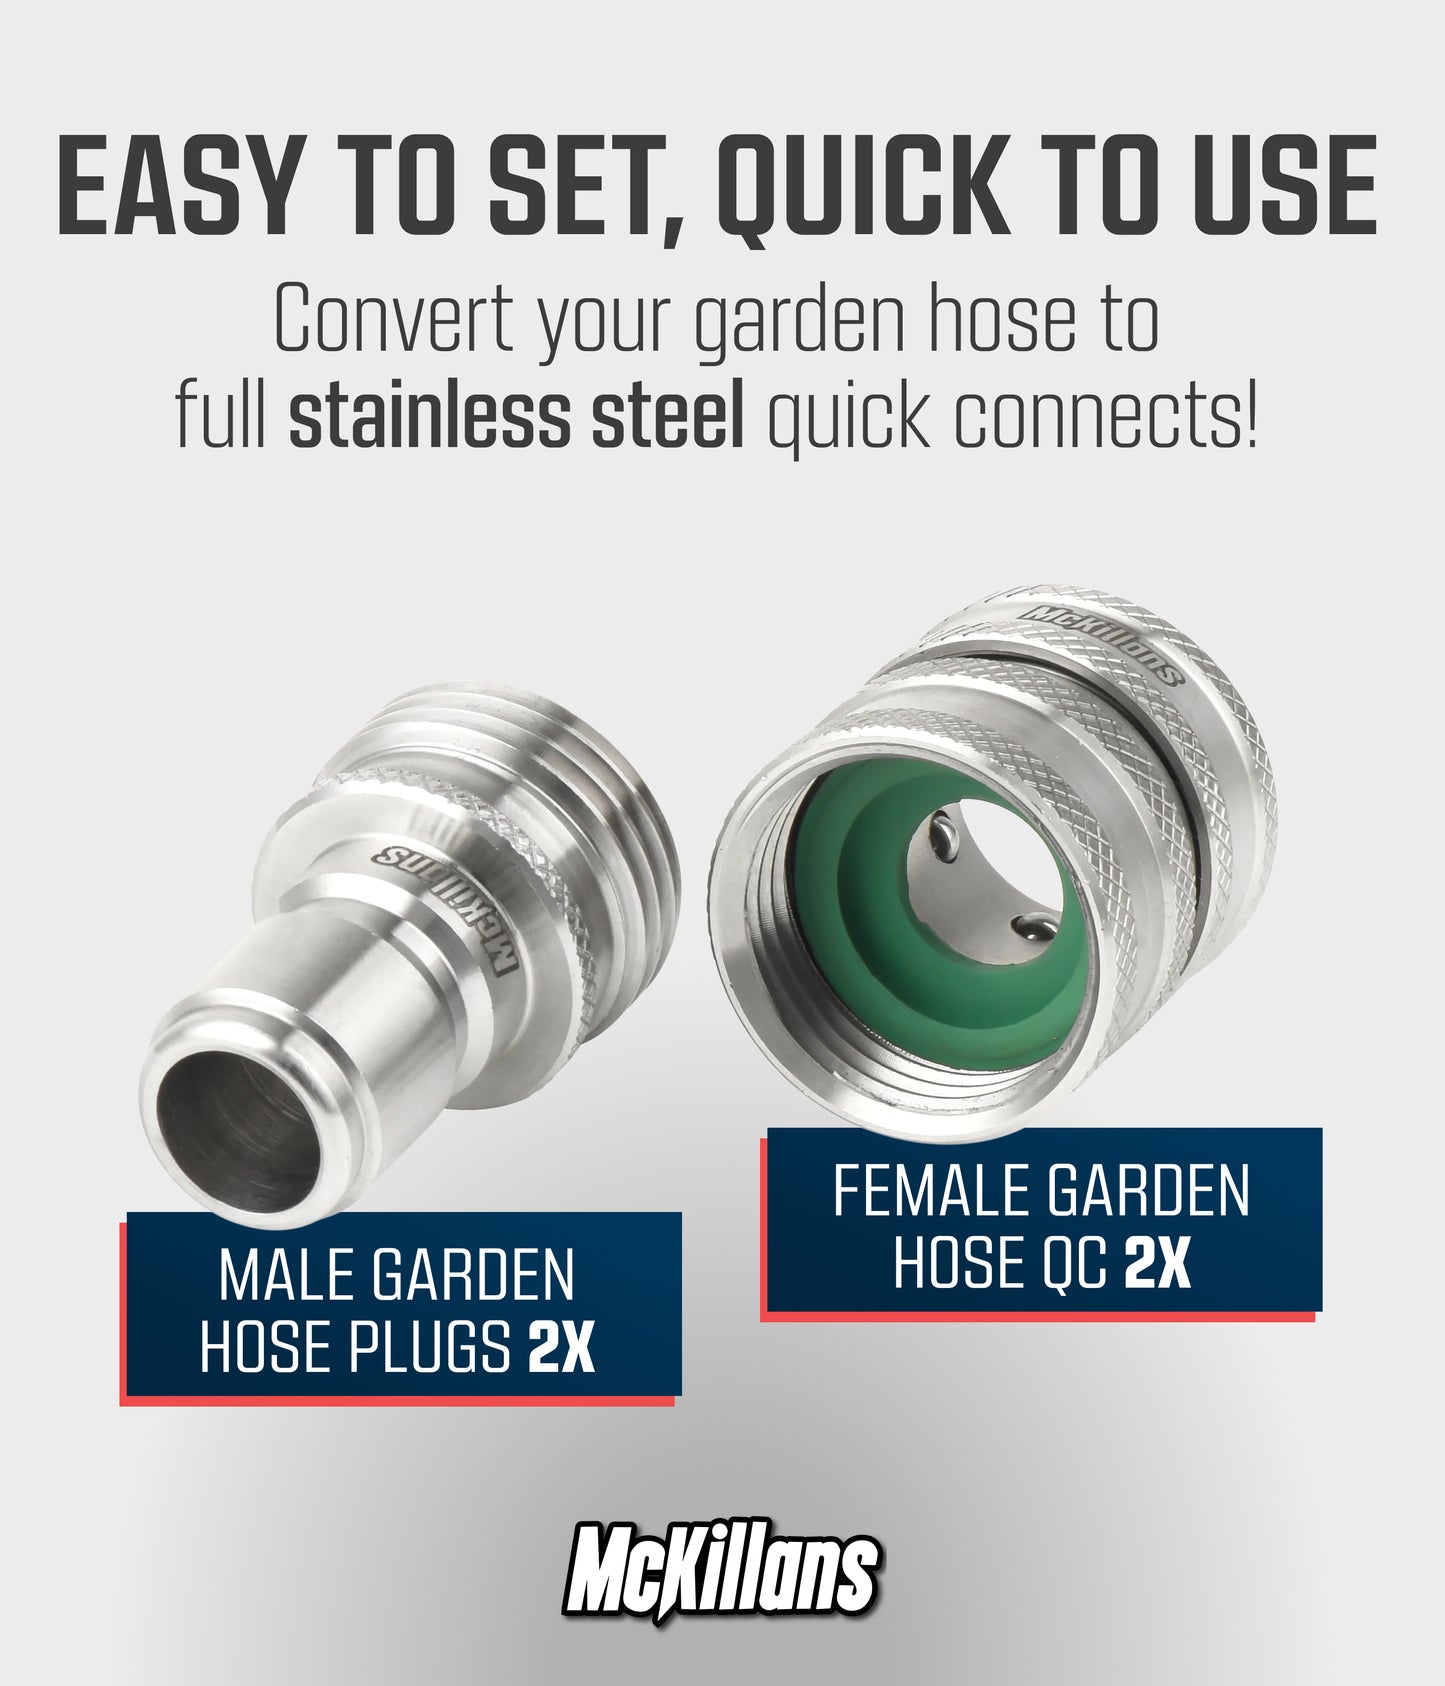 Stainless Steel Garden Hose Quick Connects GHT (3 Pack)